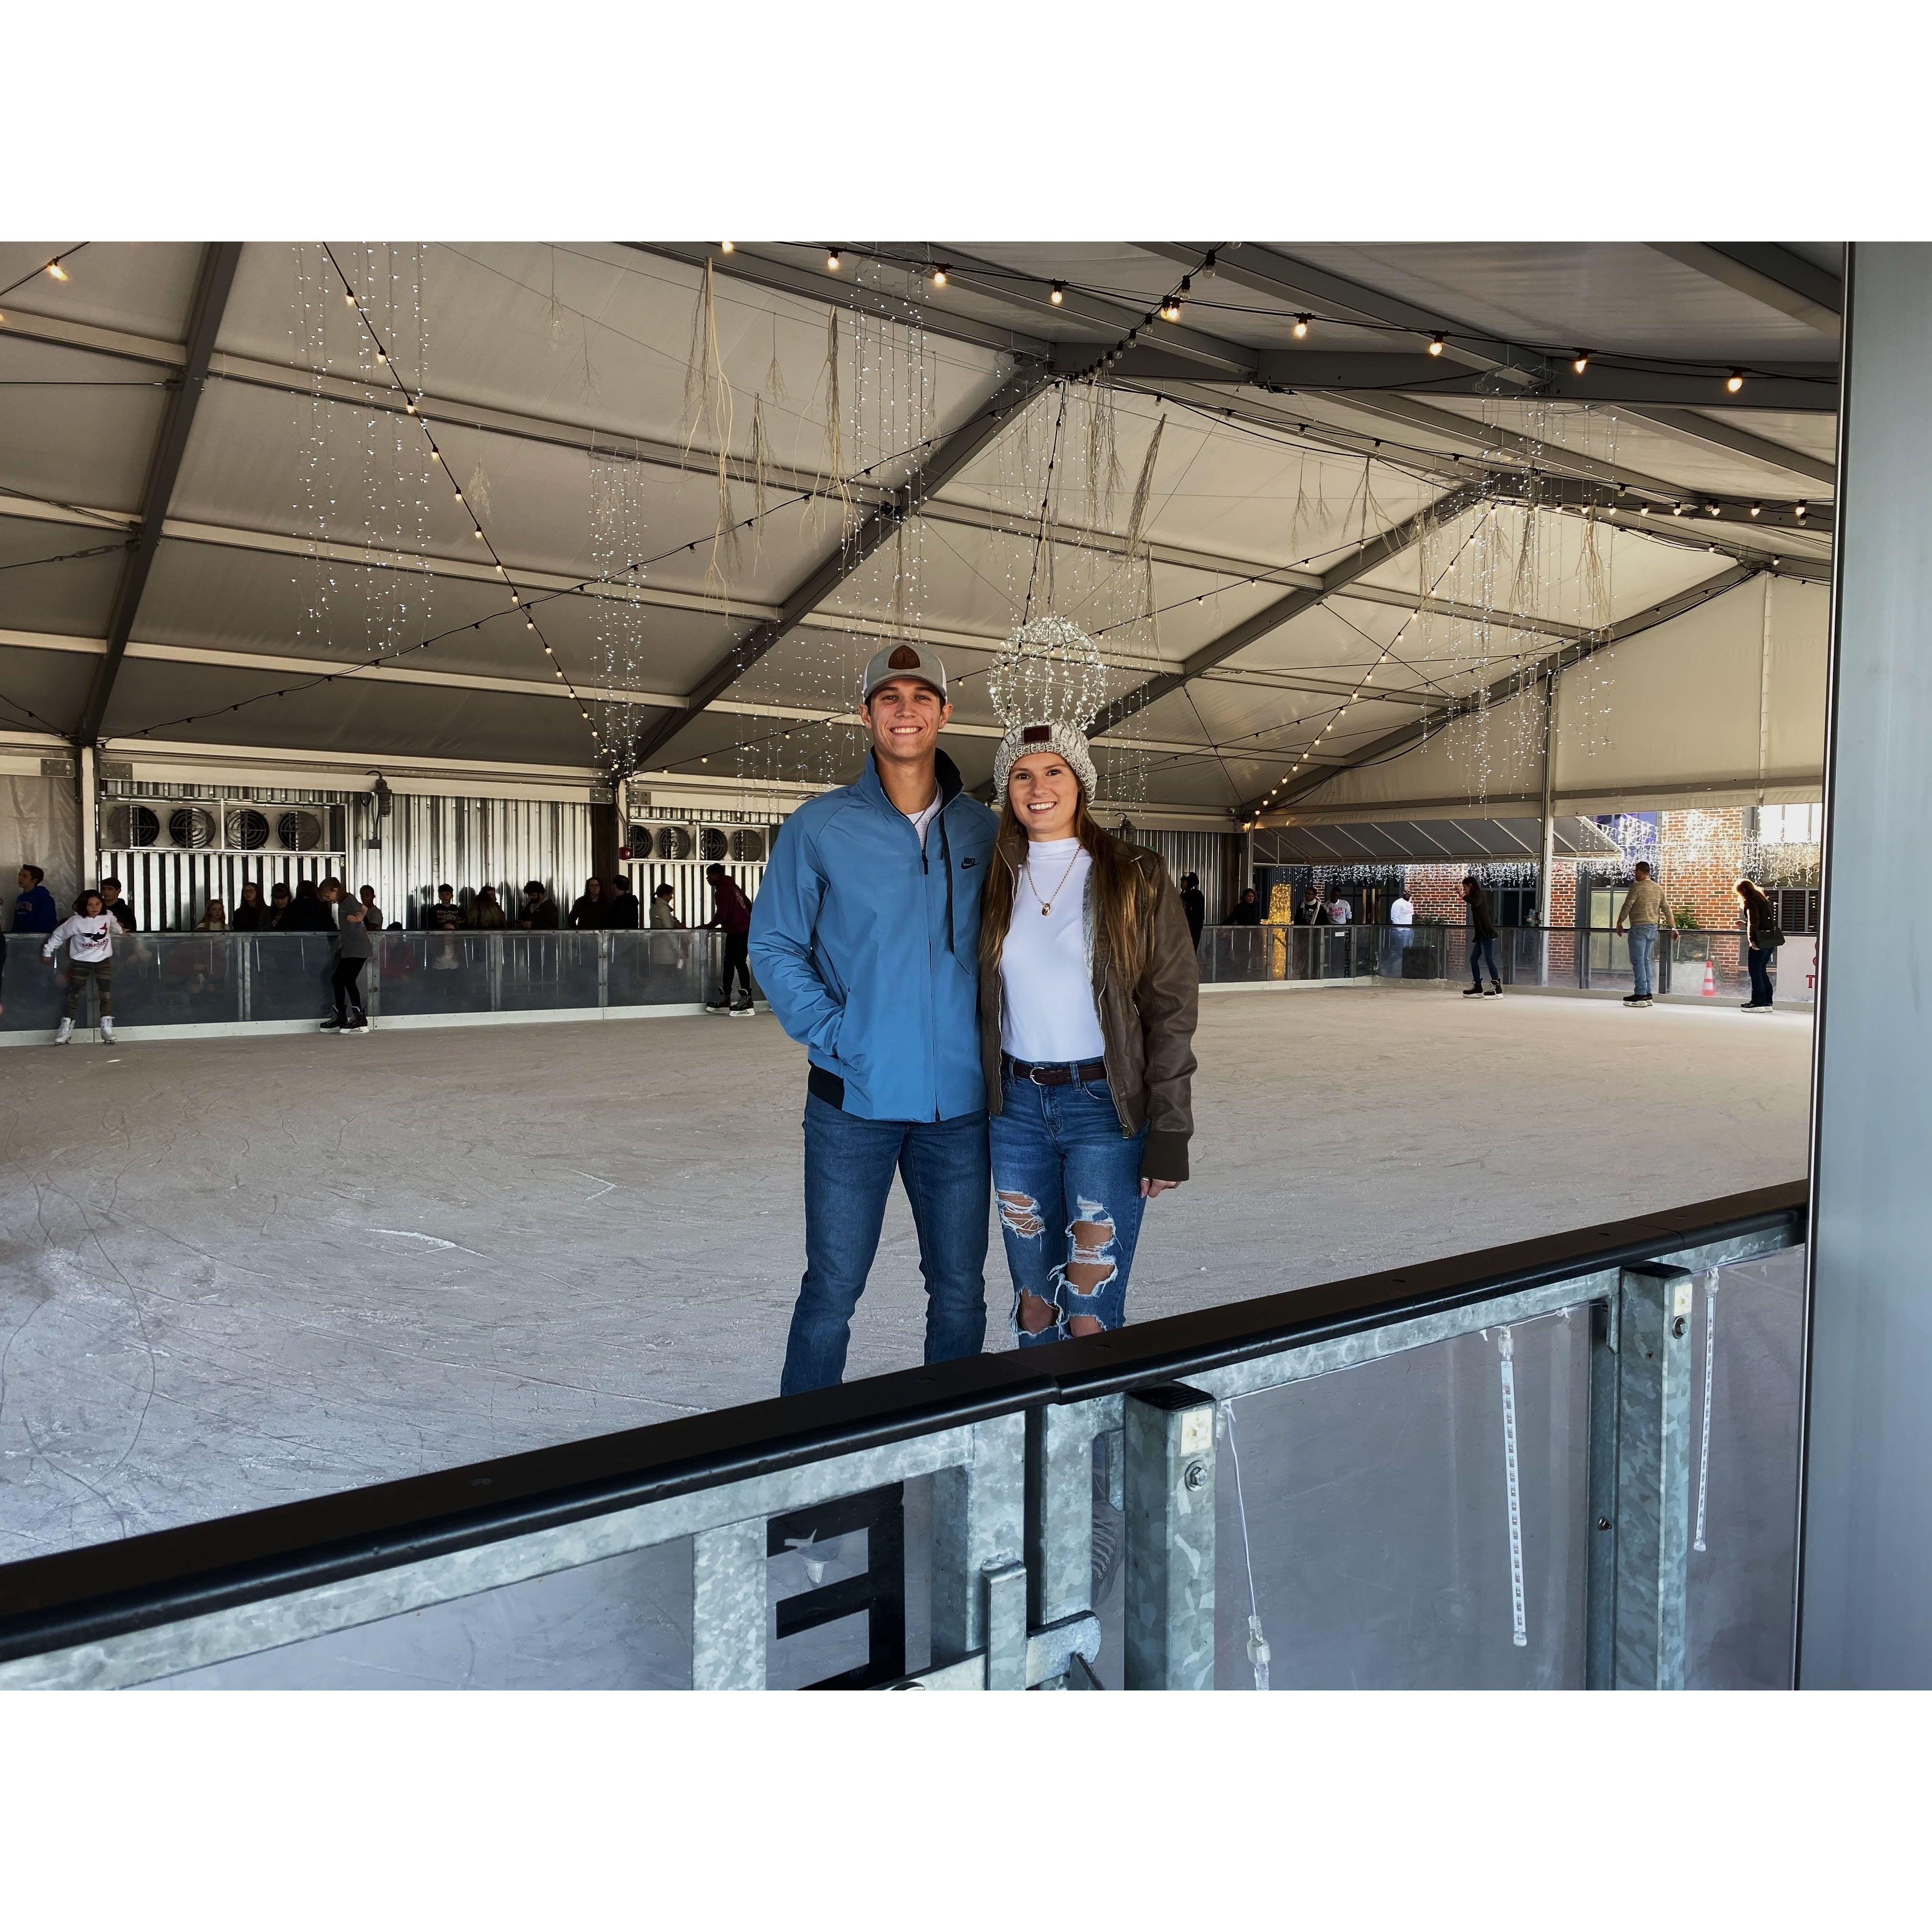 Ice skating on a rooftop in GA